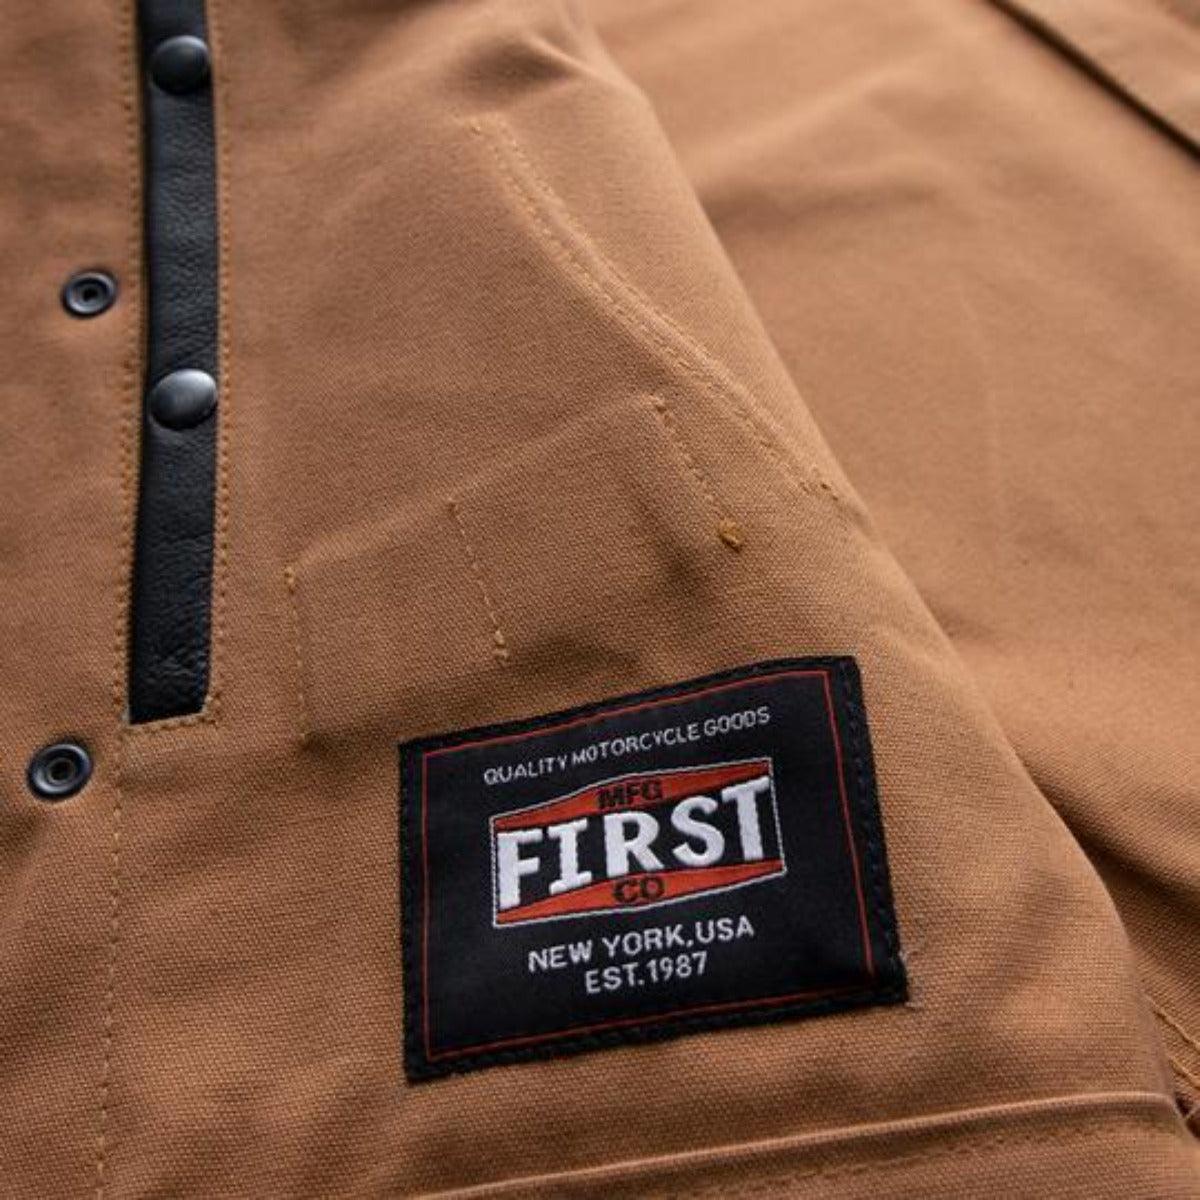 First Manufacturing Hunt Club - Men's Motorcycle Leather & Canvas Vest - American Legend Rider